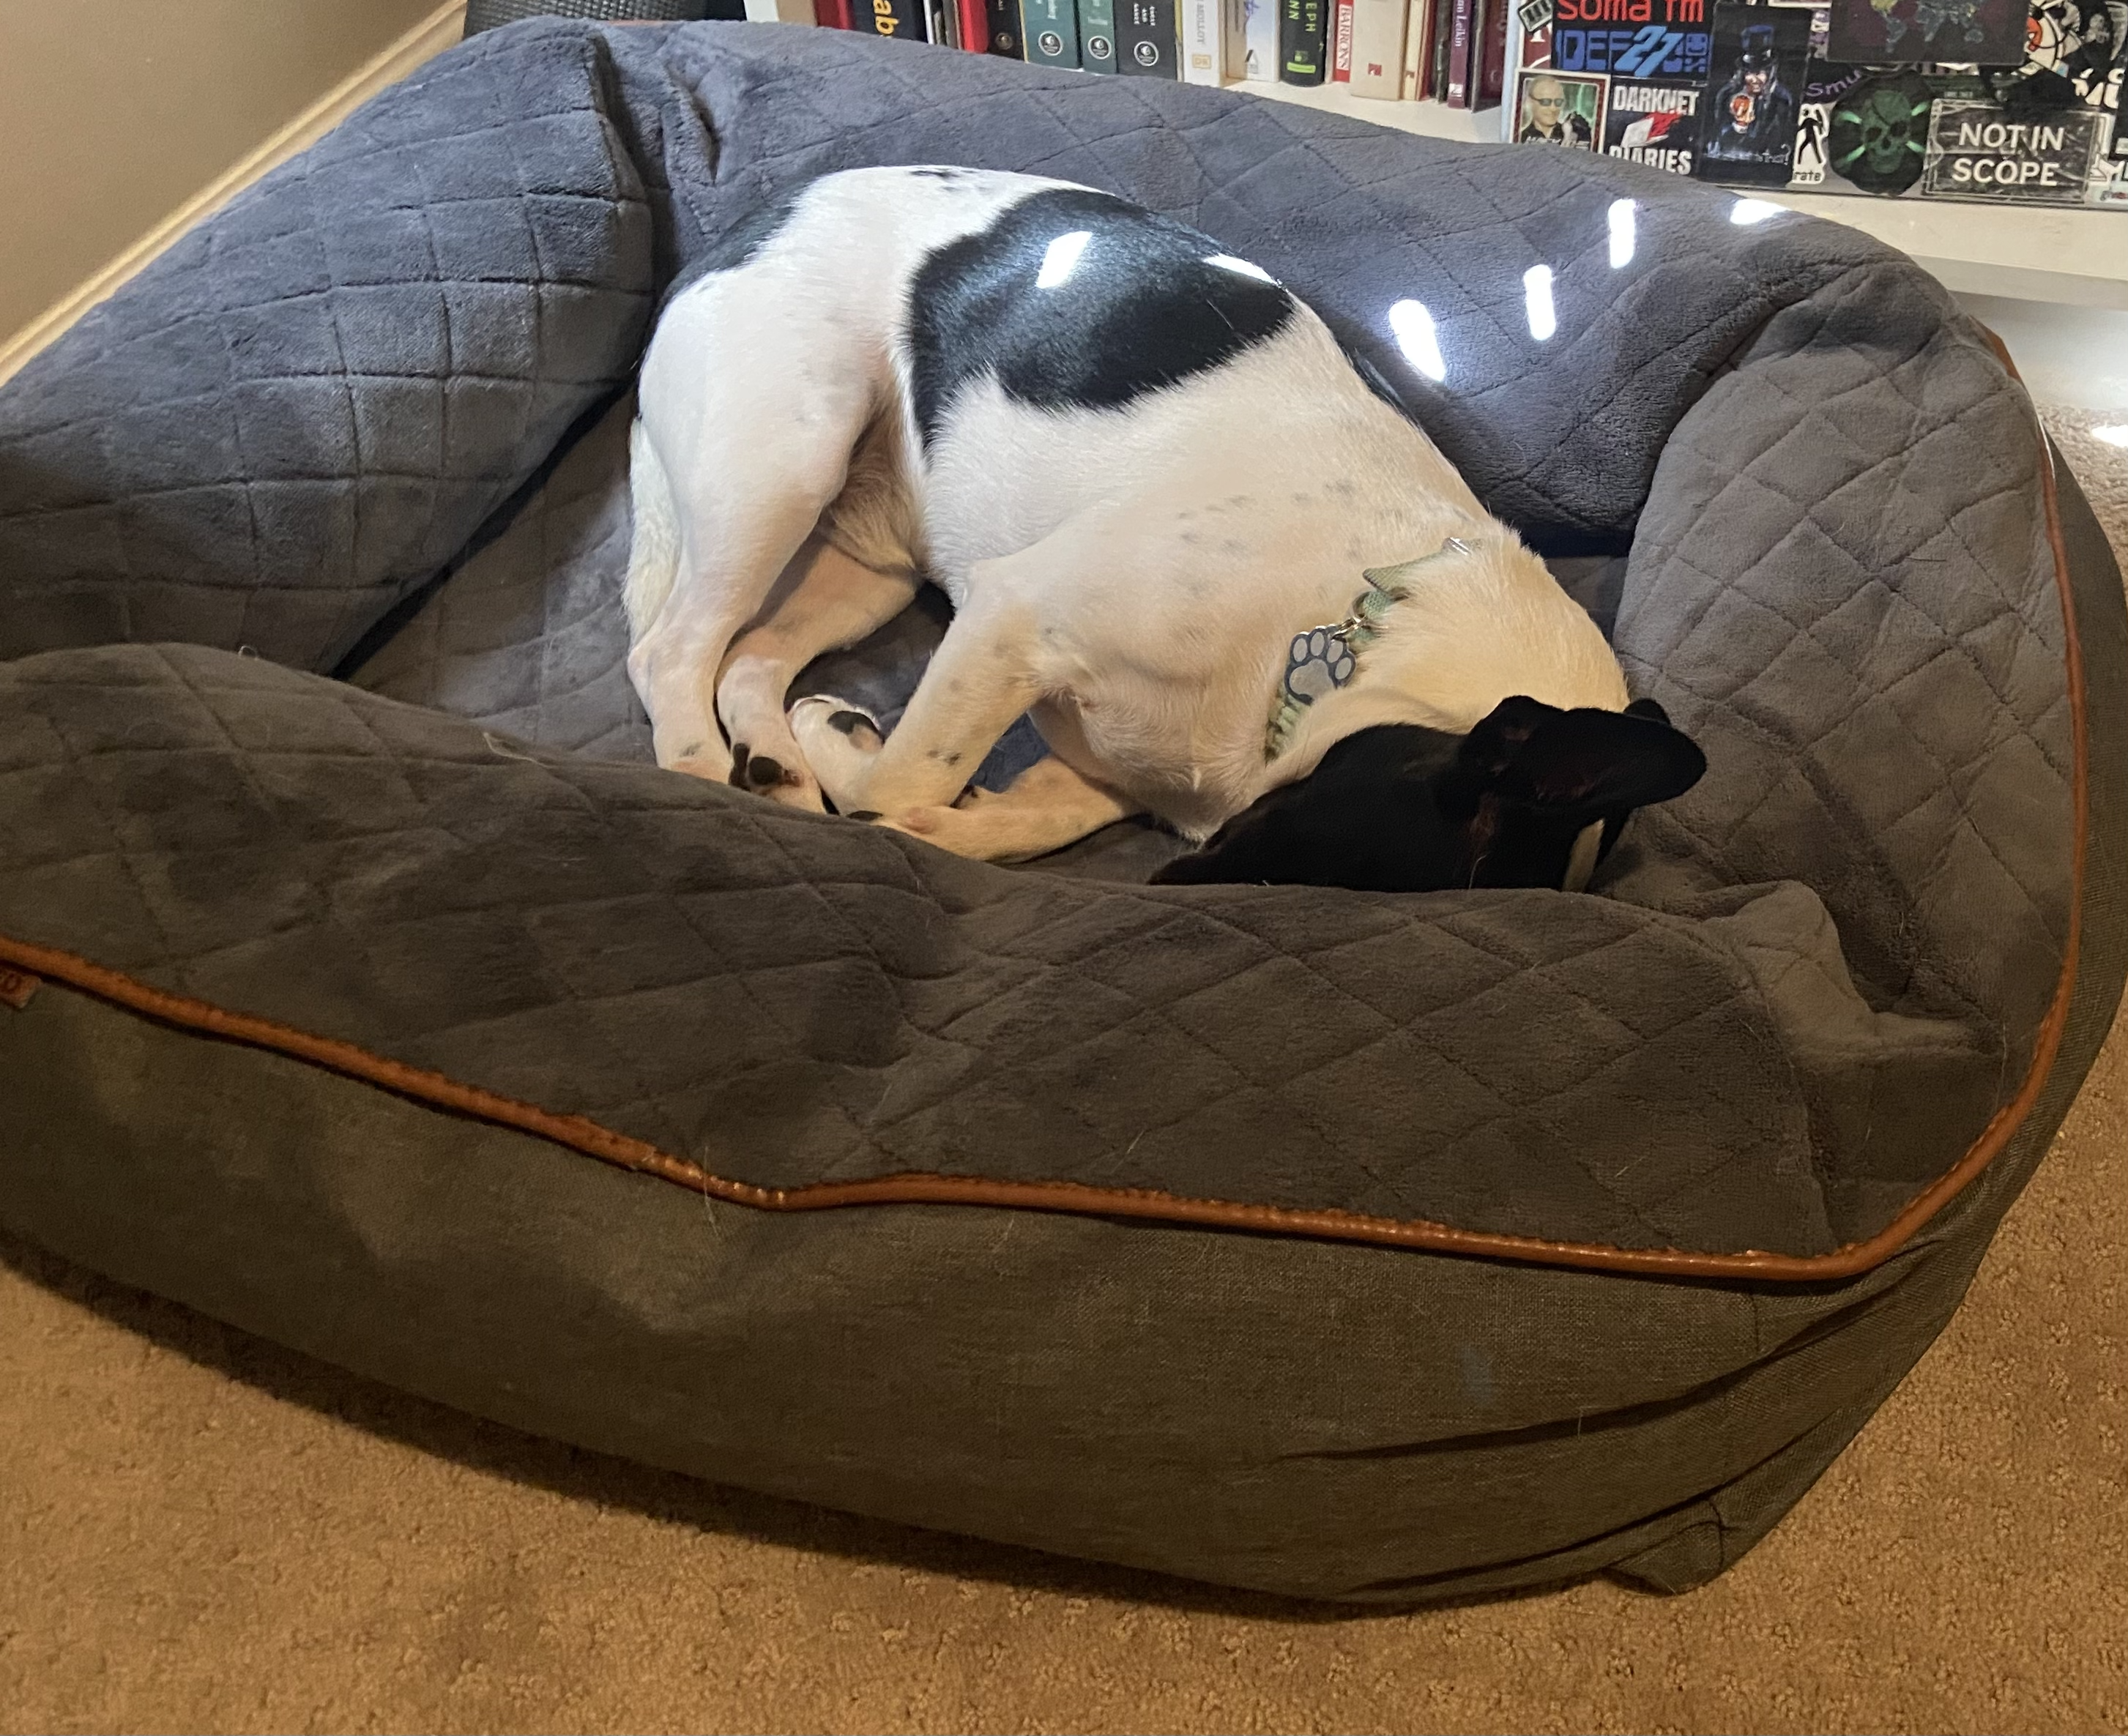 Black and white dog sleeping in a bed